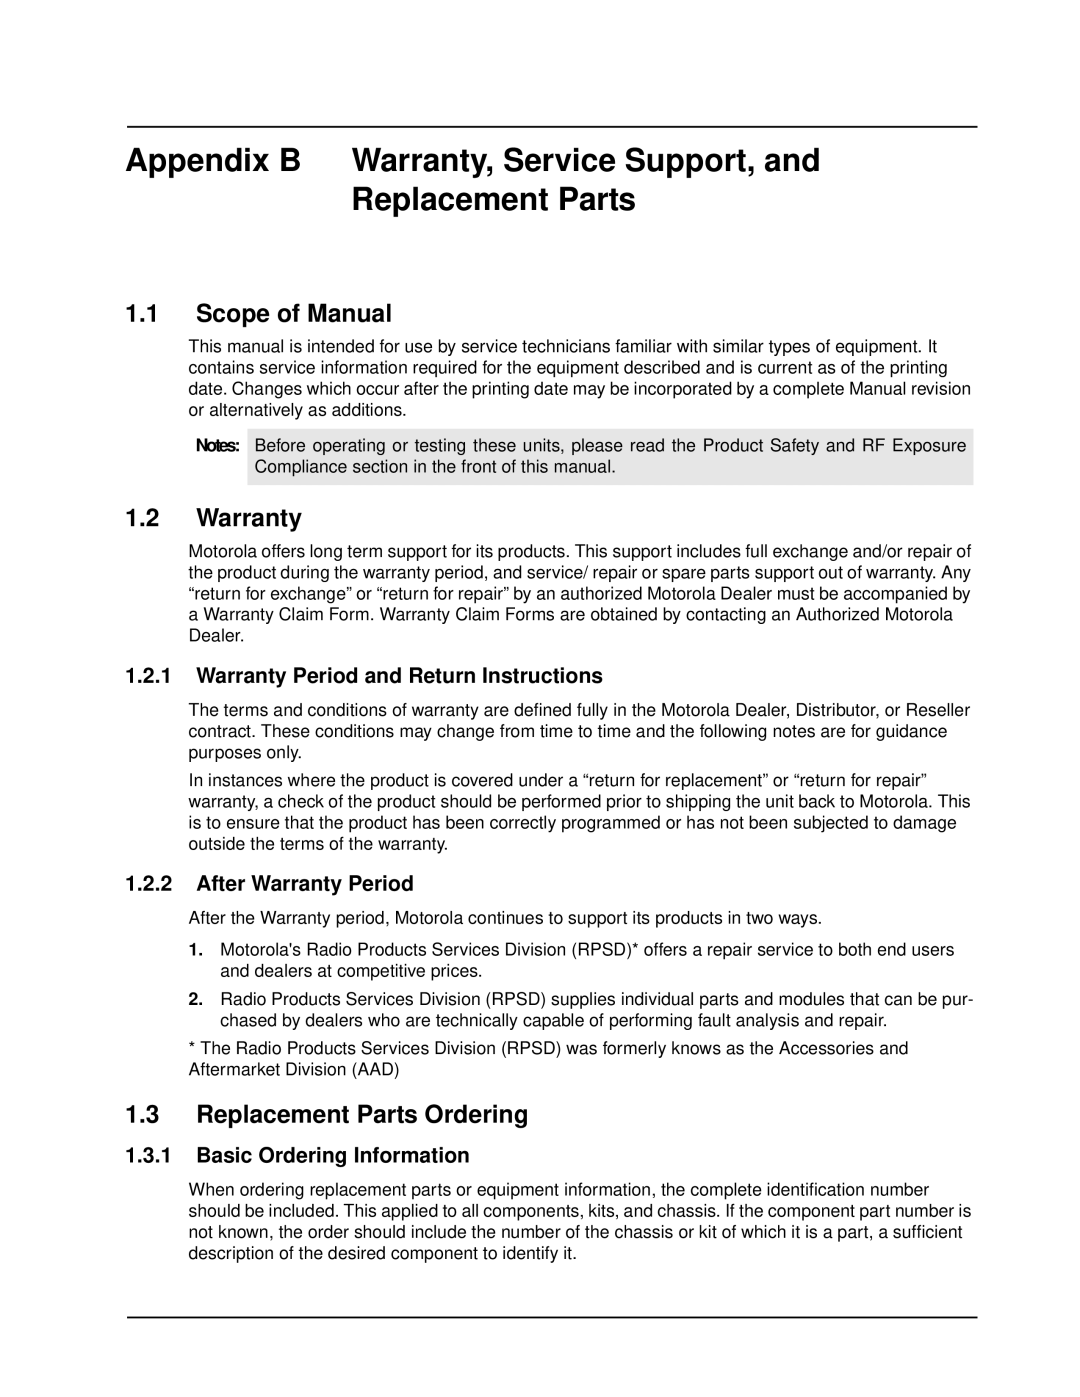 Motorola EP450 Appendix B Warranty, Service Support, and Replacement Parts, Scope of Manual, Replacement Parts Ordering 